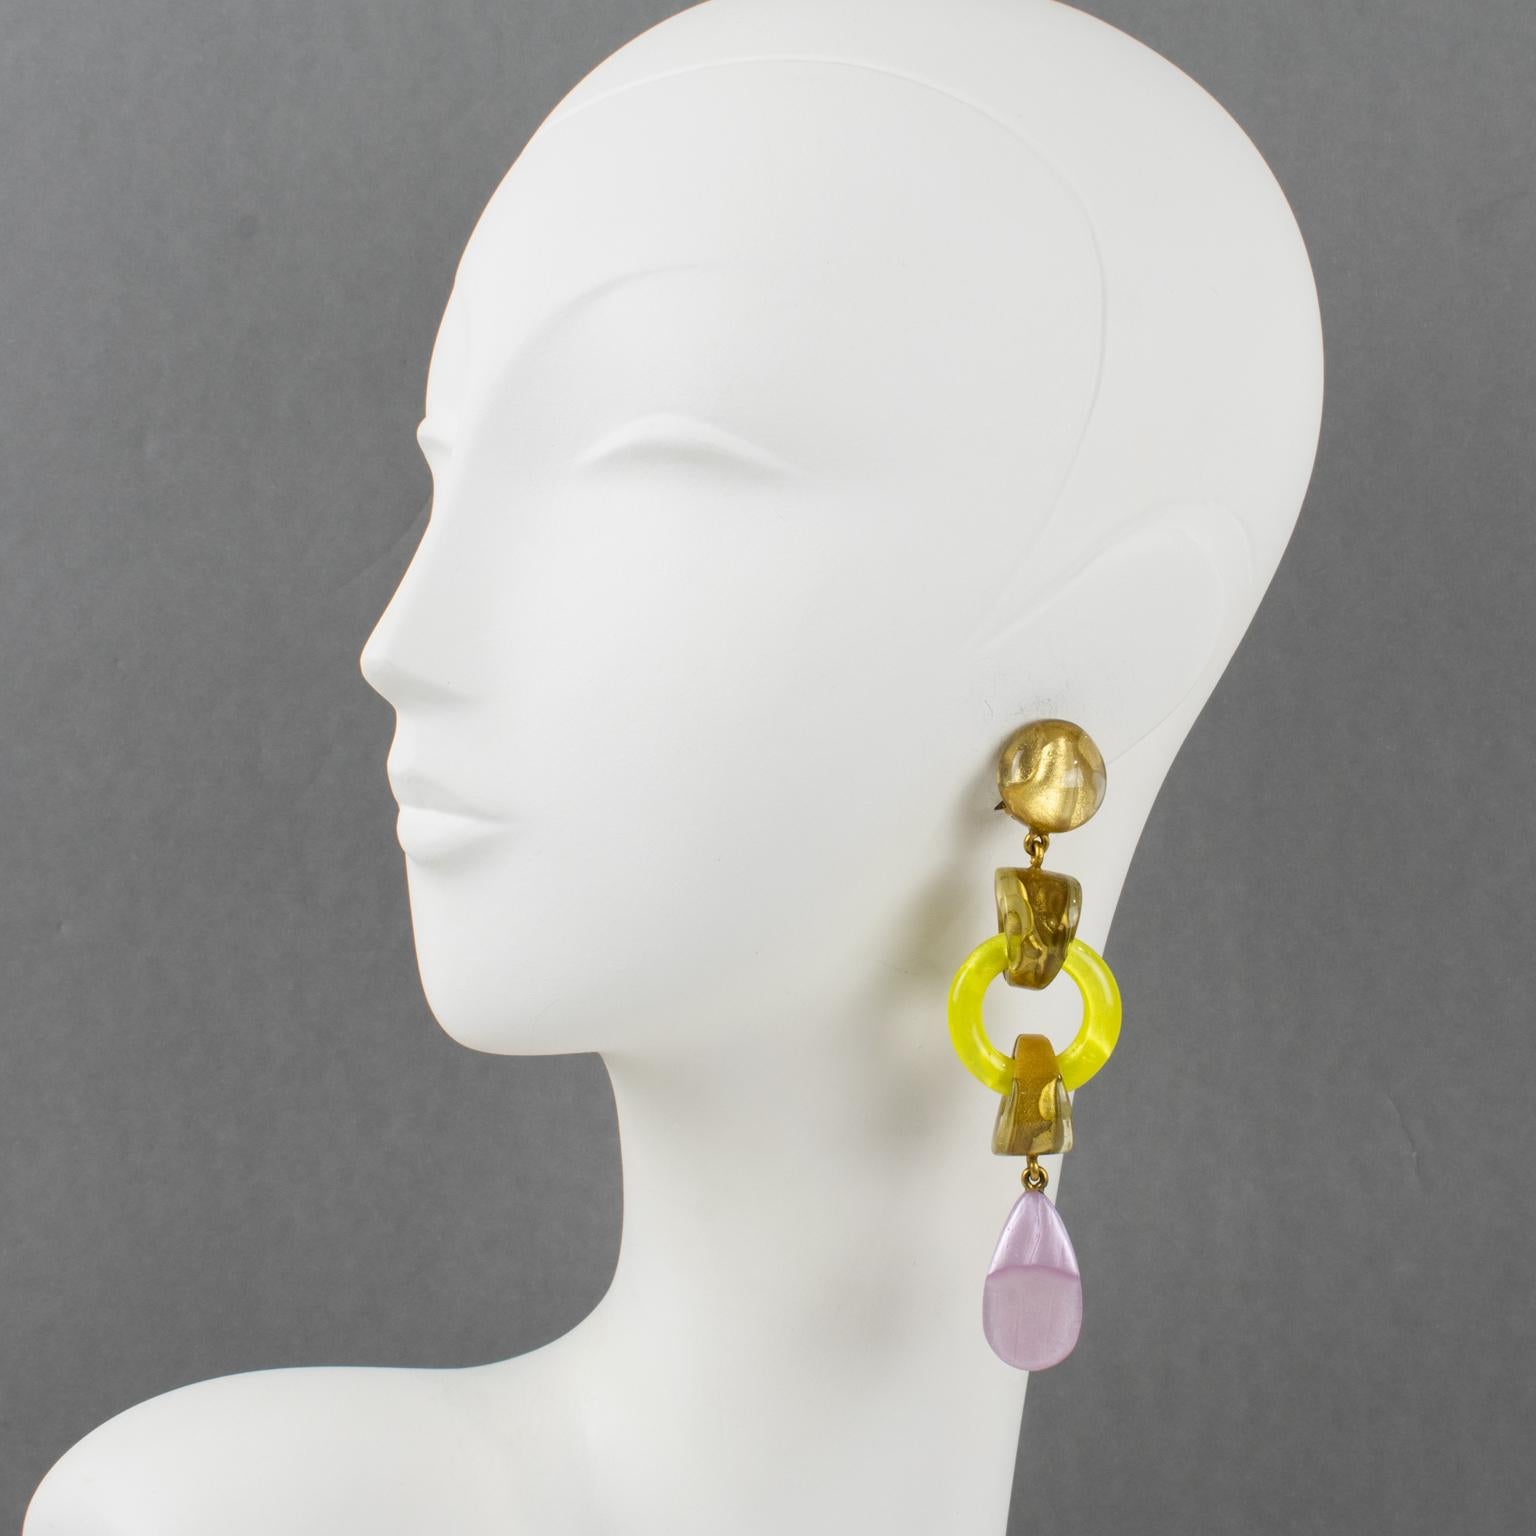 Dominique Denaive, Paris, designed these spectacular clip-on earrings. They feature a dangling shape in resin with drops and donuts in lovely citrus yellow, light purple lavender, and pearlized gold colors. The engraved signature at the back of each